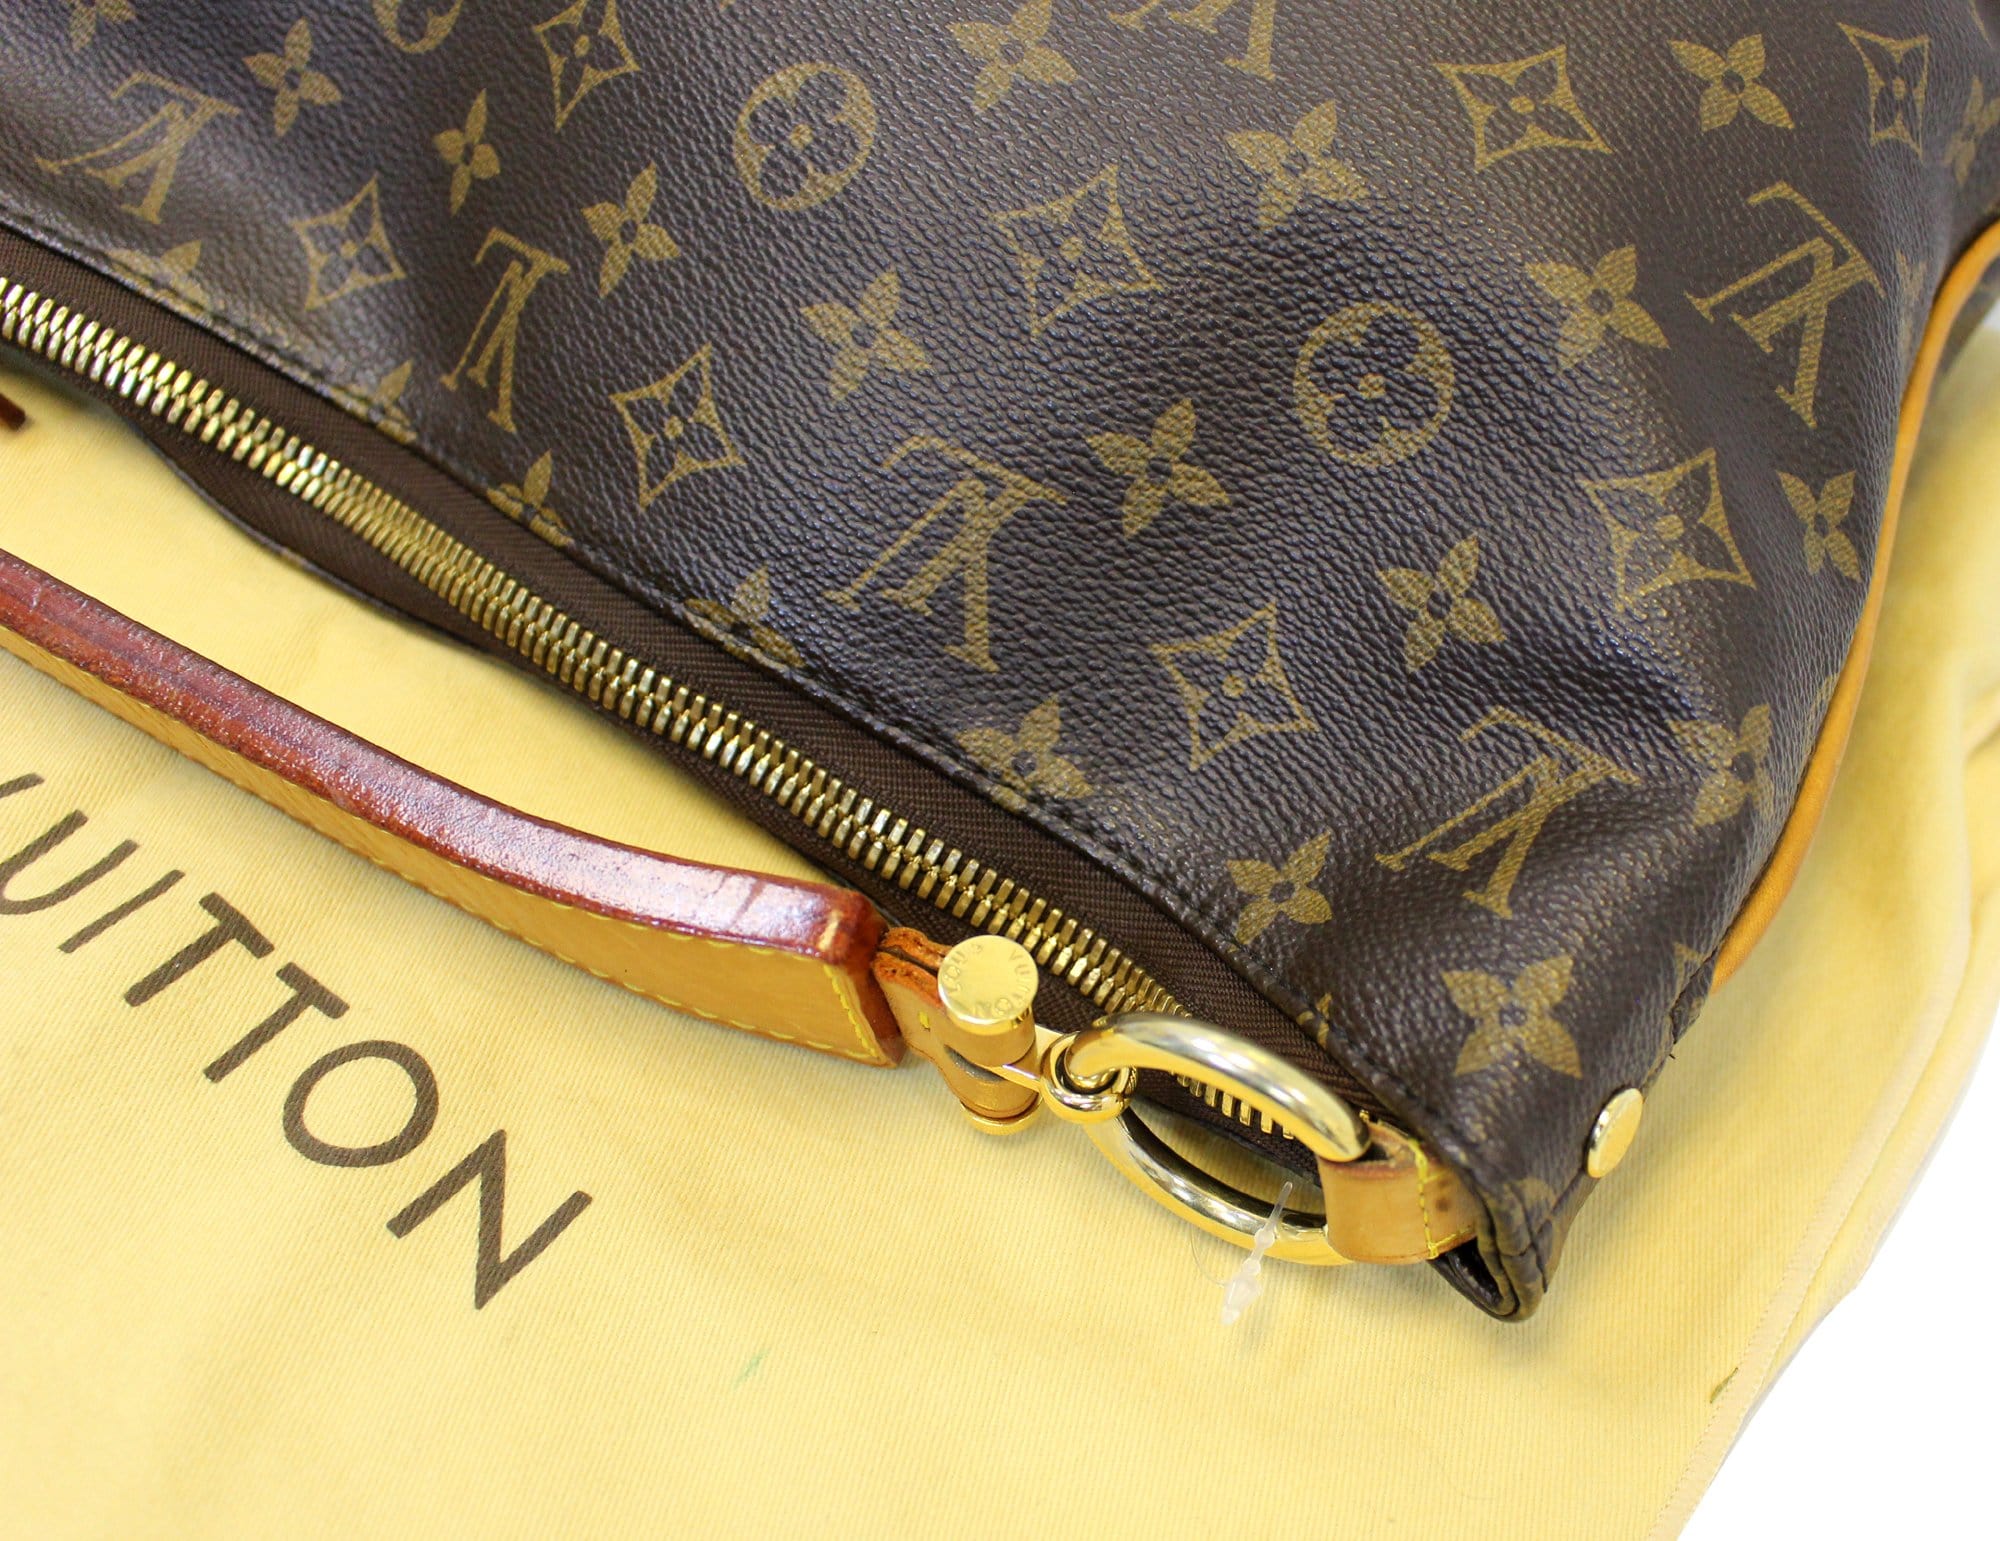 Date Code & Stamp] Louis Vuitton Sully PM Monogram Canvas